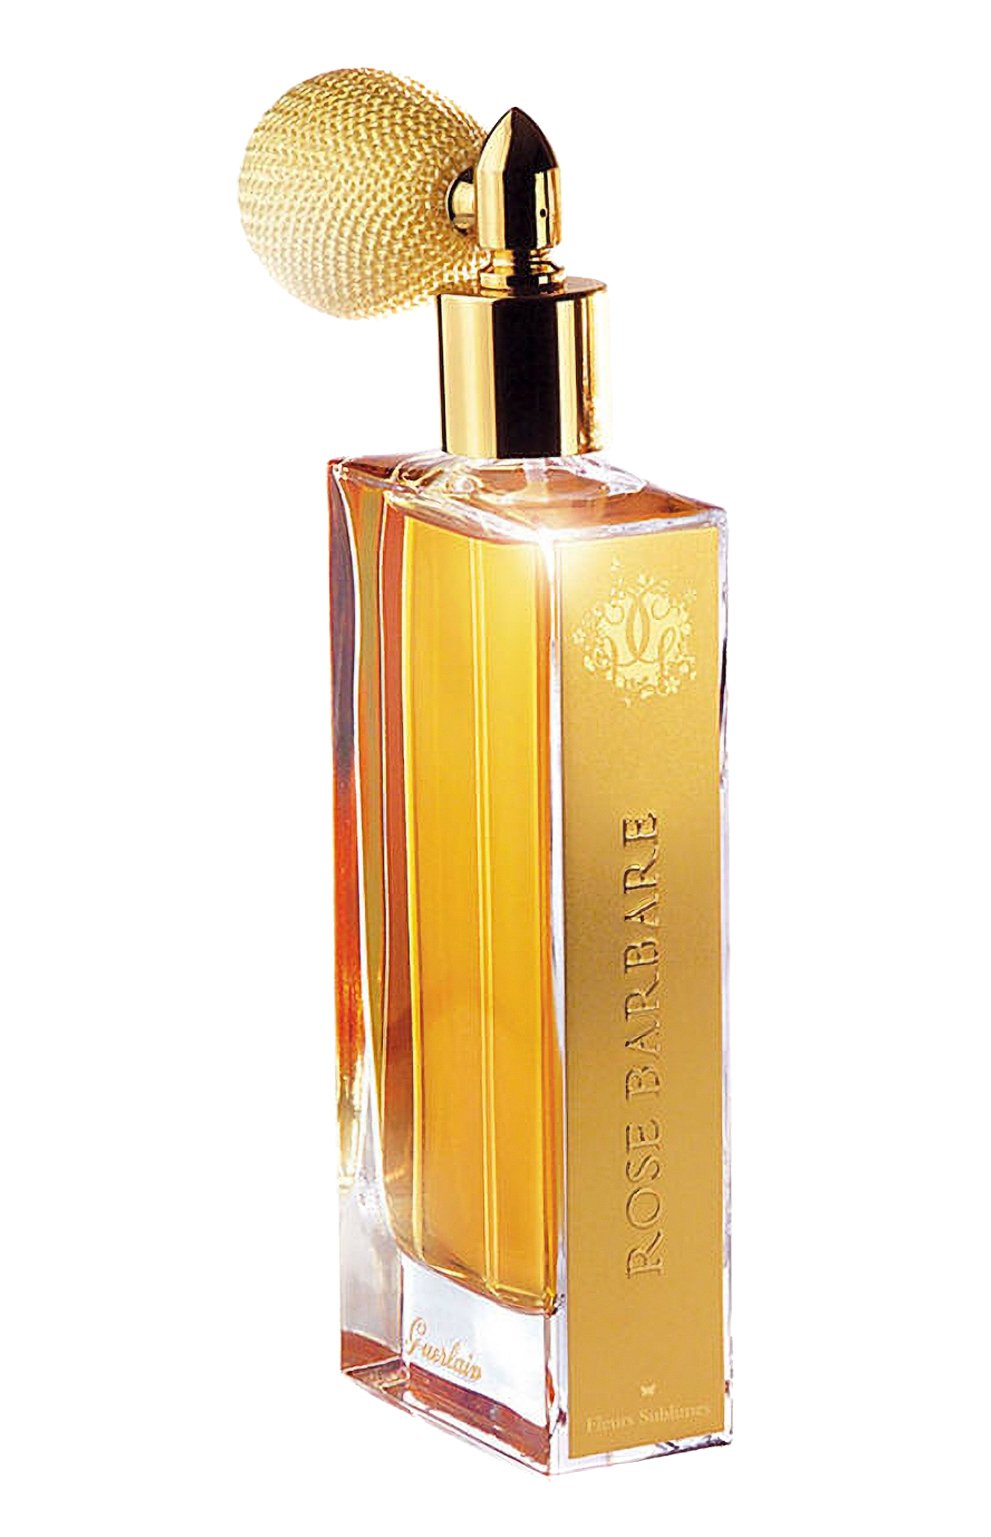 Rose Barbare by Guerlain » Reviews & Perfume Facts